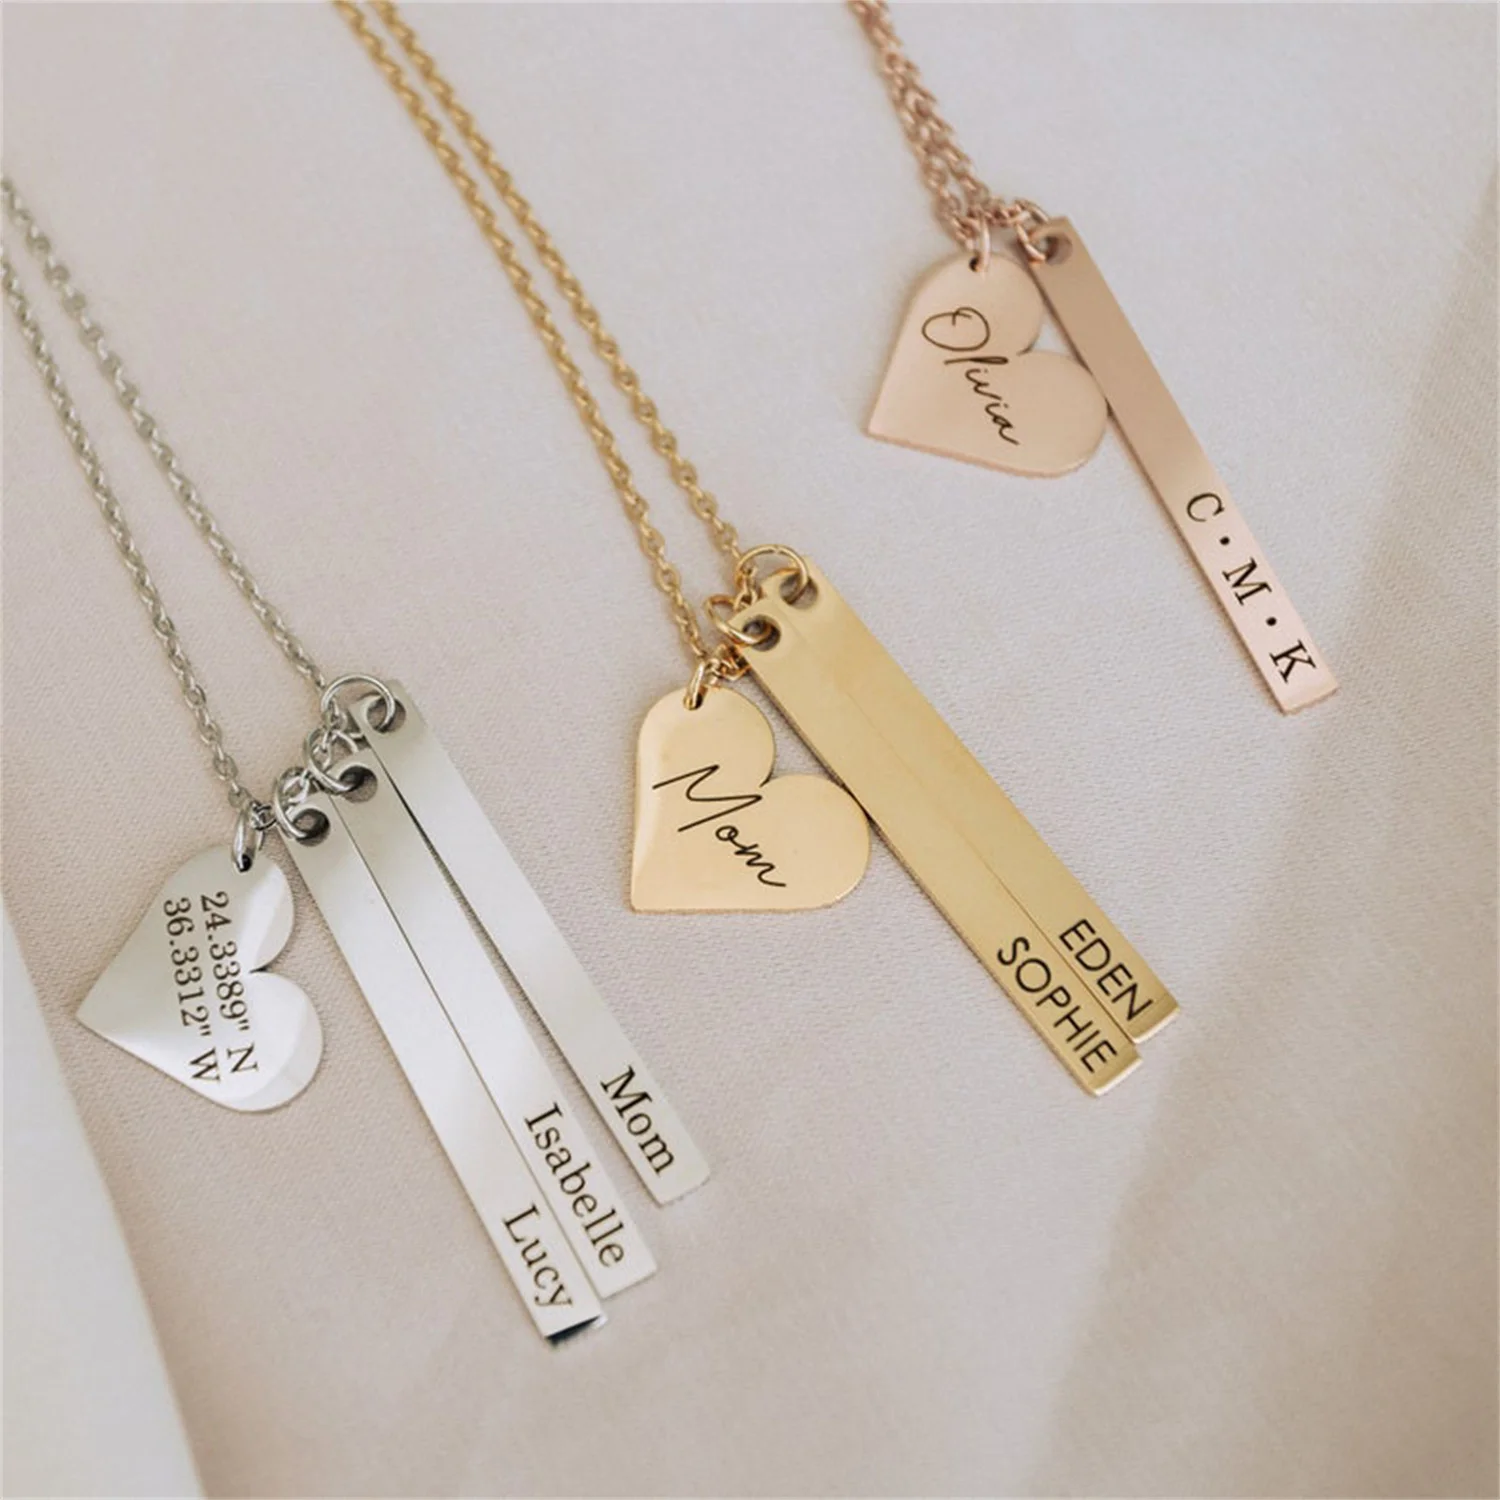 Personalized Engraved Name Bar Necklace Custom Heart Gold Charm Pendant Stainless Steel Jewelry Exquisite Gift For Family Friend the bling king diy spinning double sides photo heart shape pendant necklaces photoes memory jewelry for couple family gift